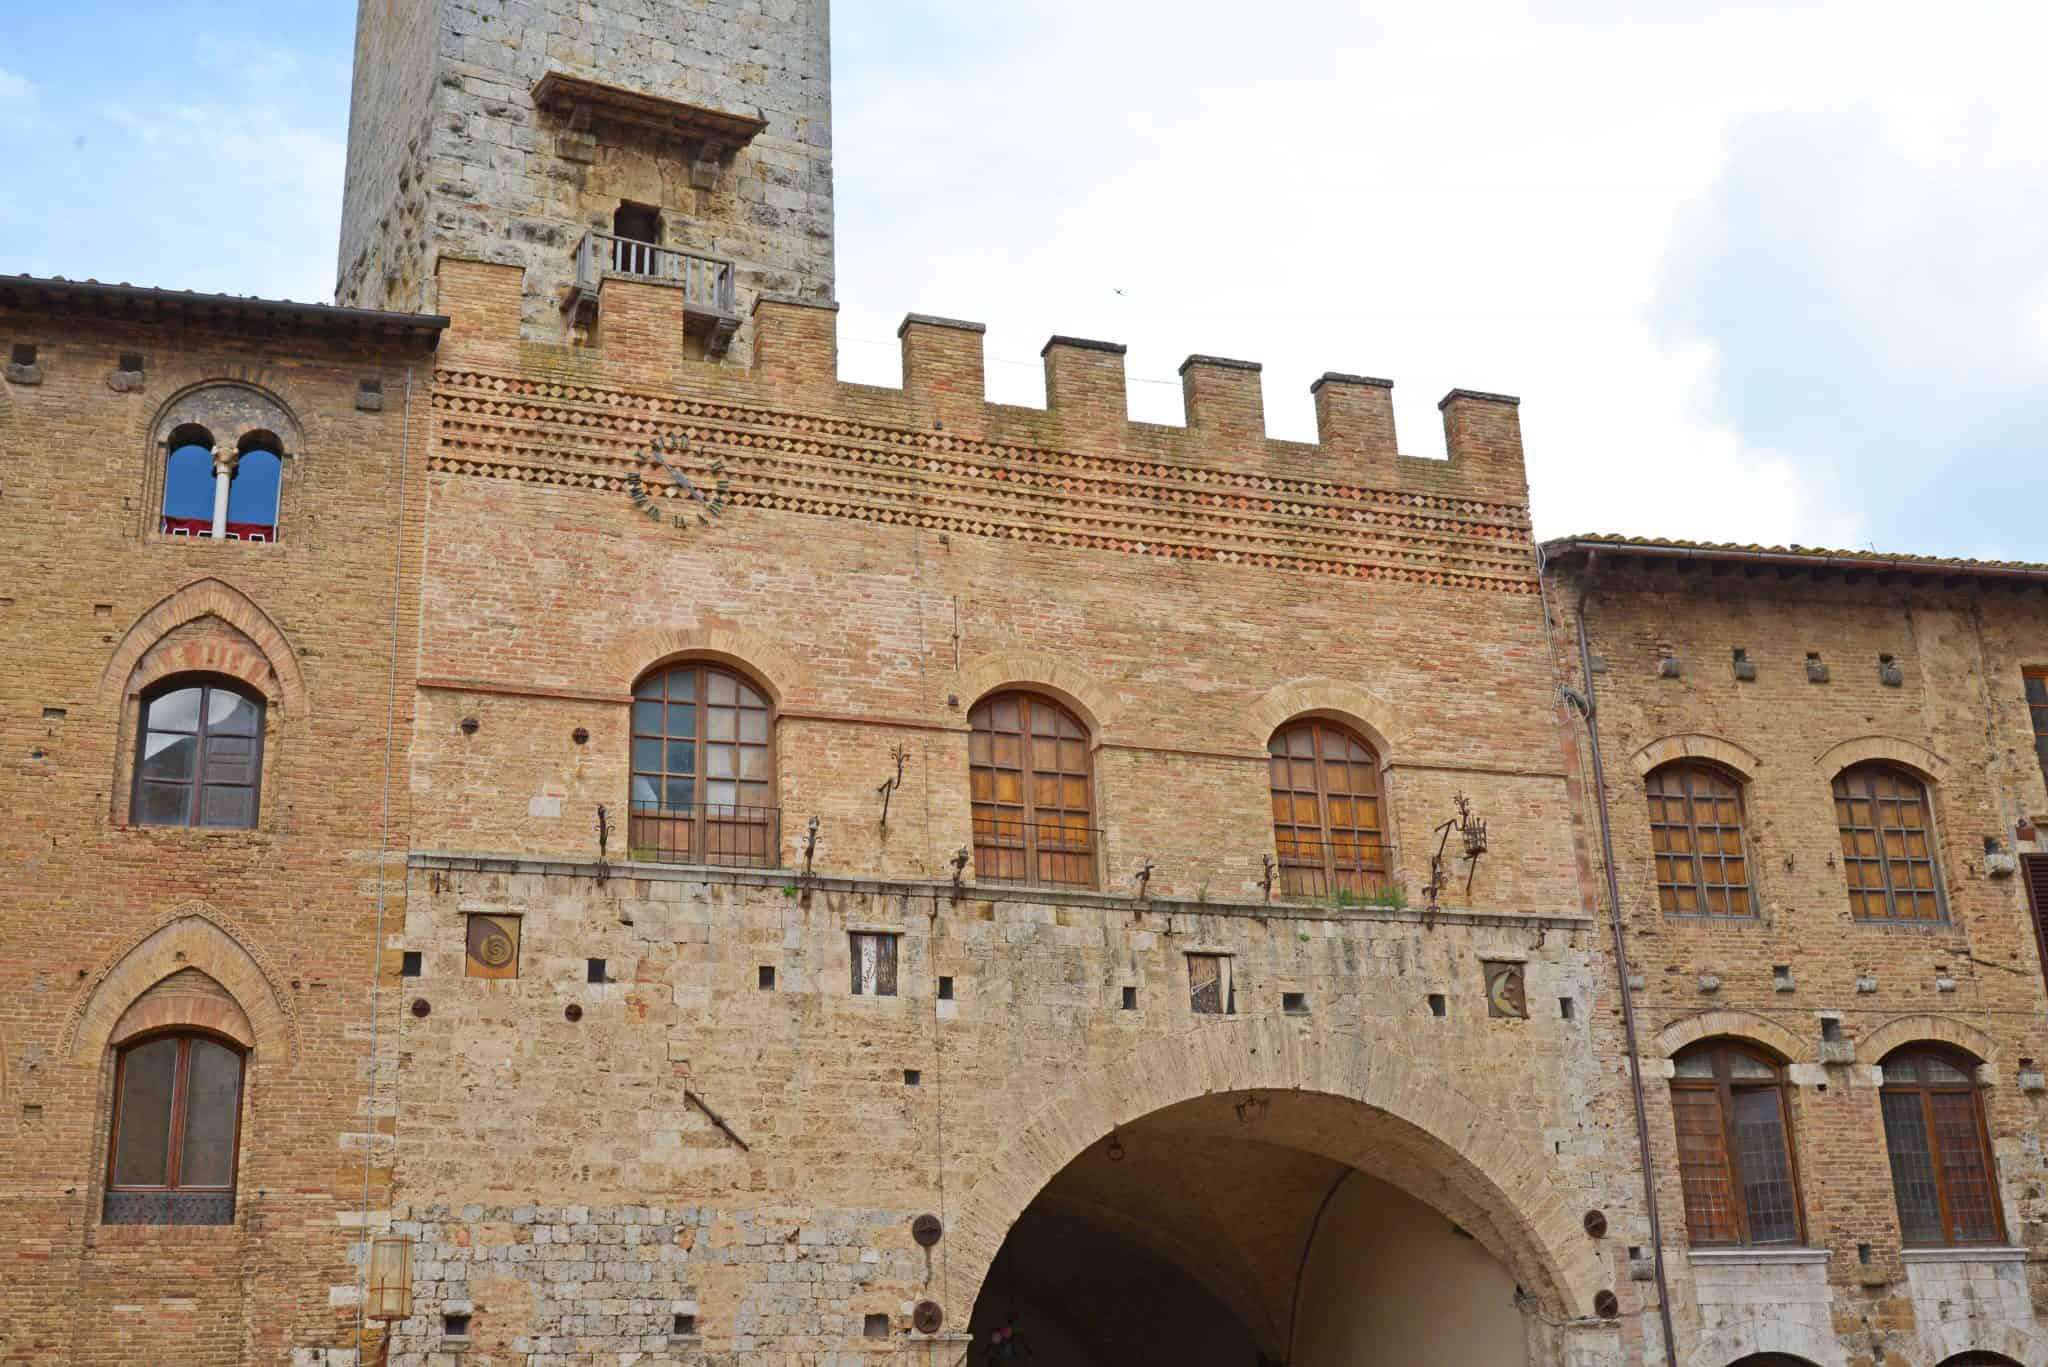 San Gimignano, a medieval town in Tuscany, is perfect for a day trip from Florence or Rome. Intimate with fabulous food, views and gelato, it is the quintessential Italian village. #SanGimignano #tuscany www.savoryexperiments.com 